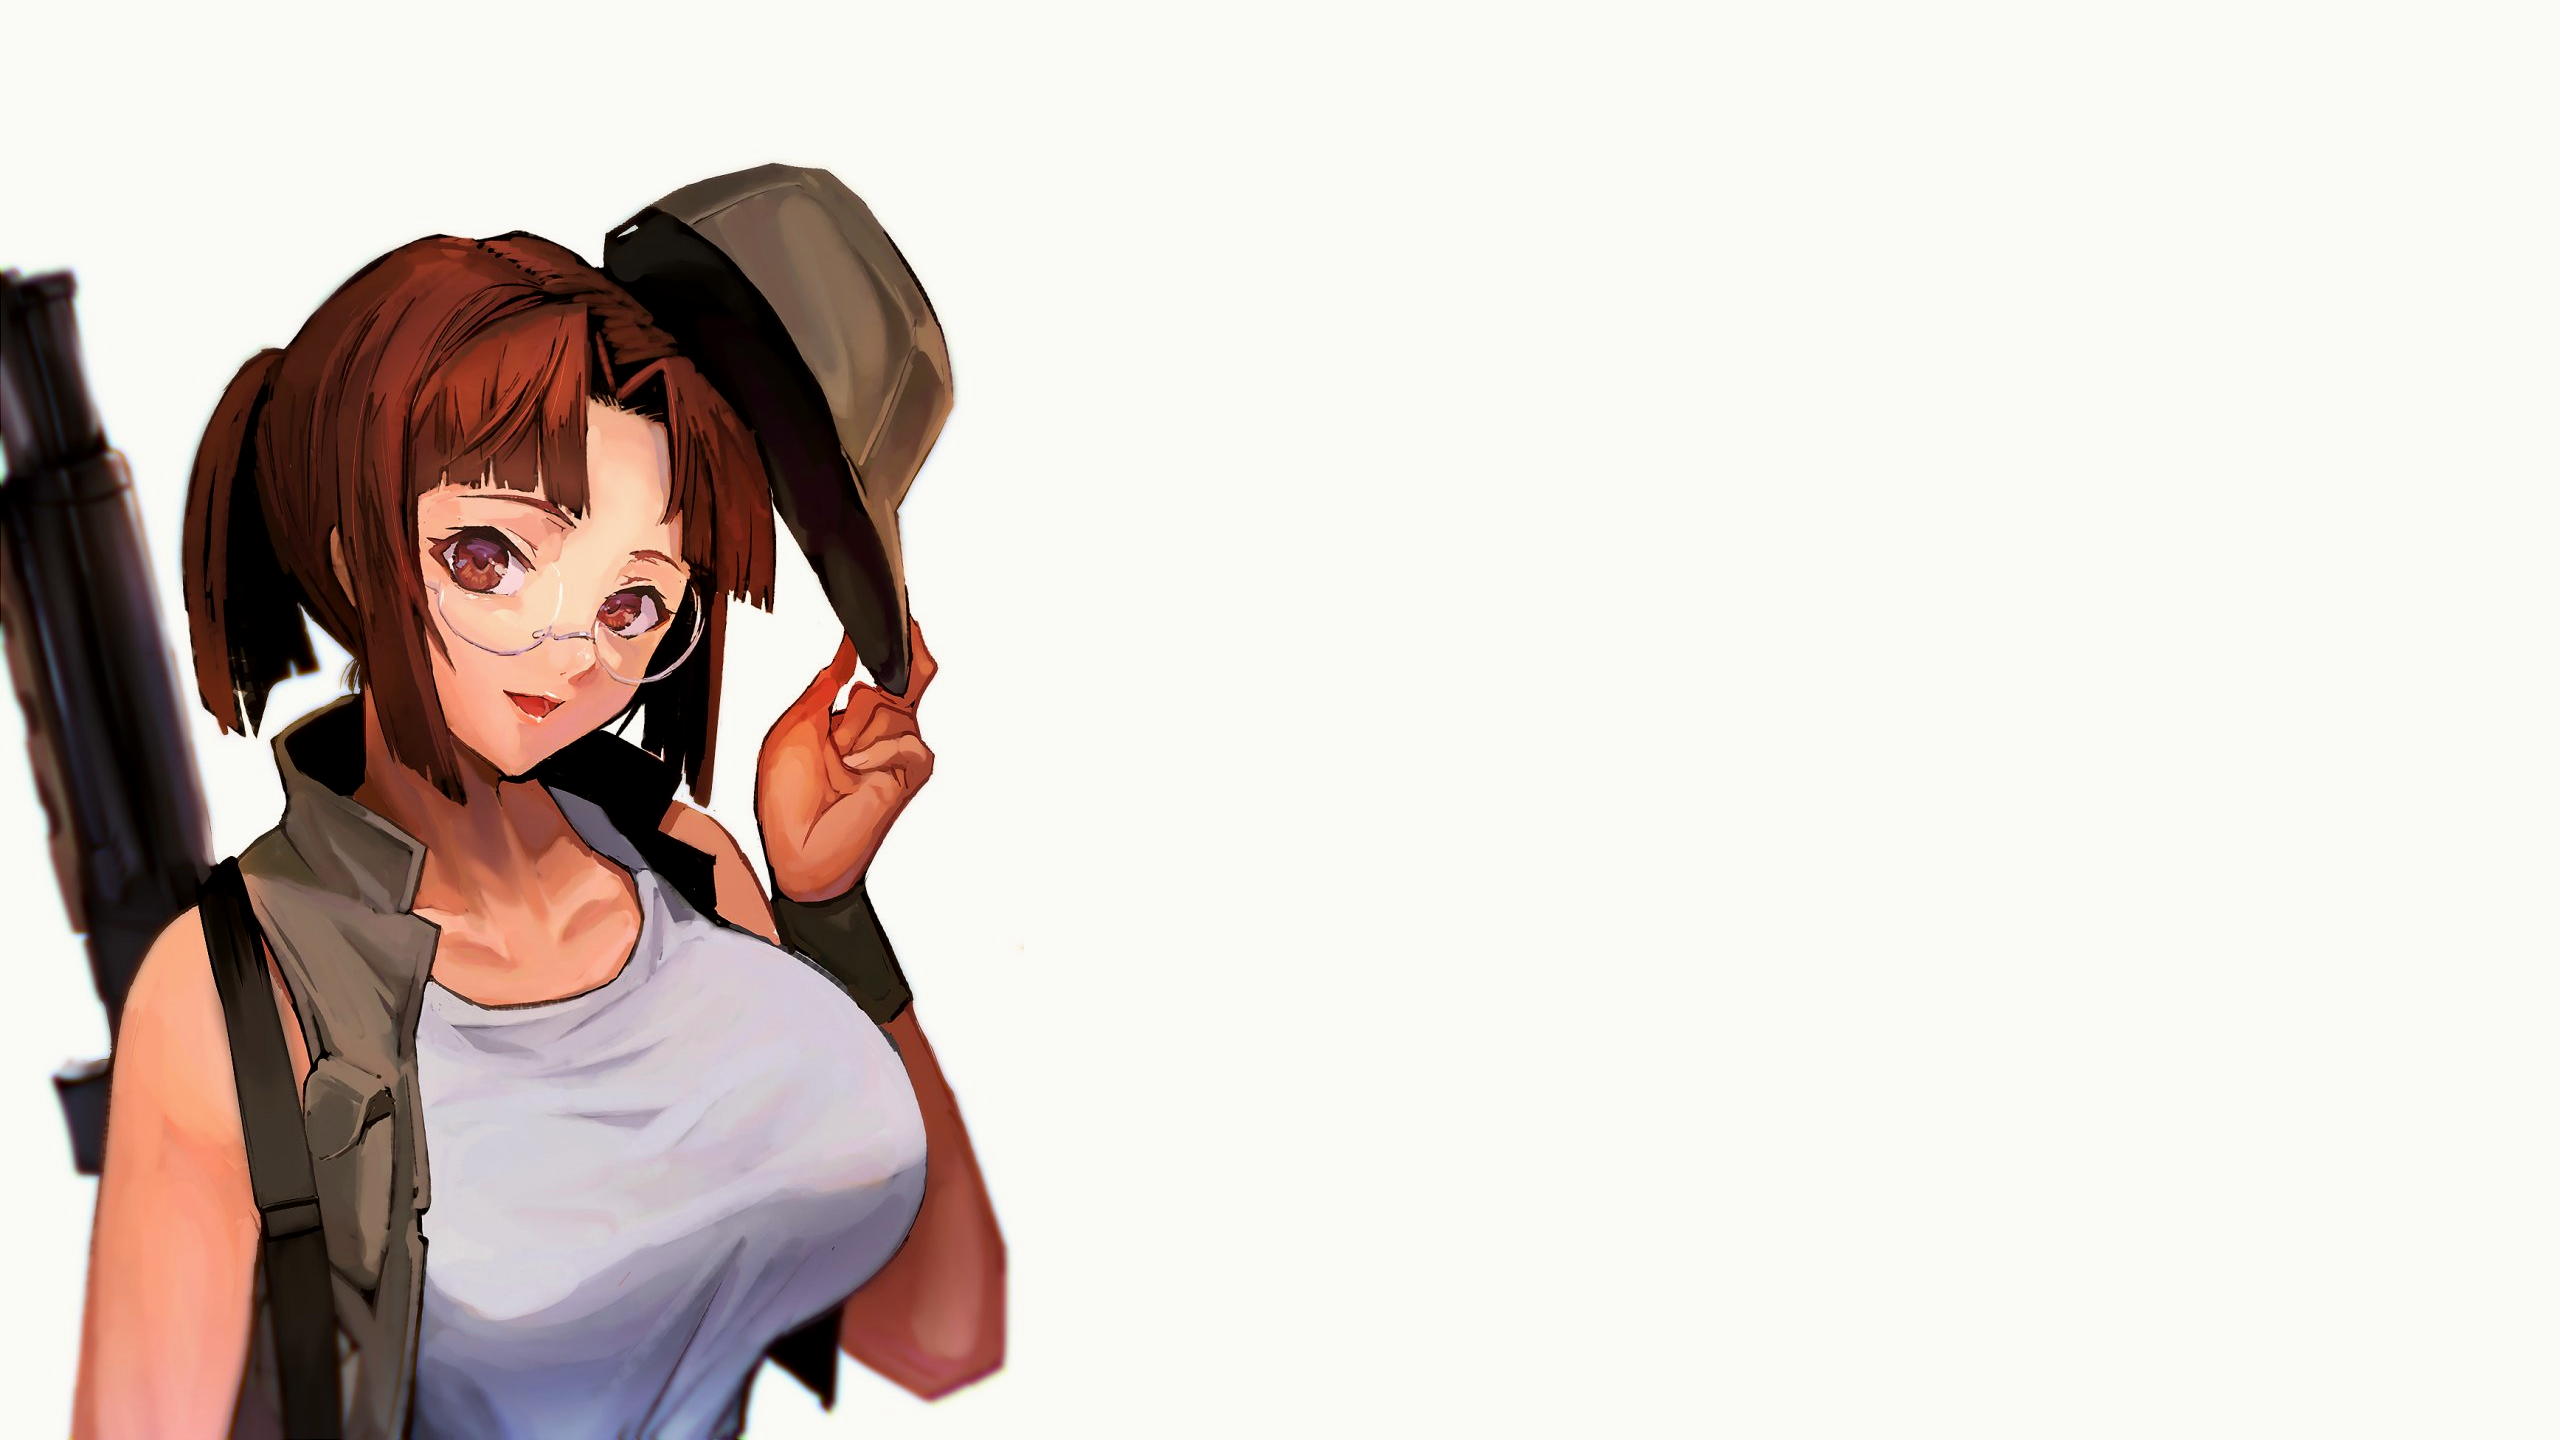 General 2560x1440 video games video game girls boobs big boobs sidelocks bangs white background simple background hat glasses women with glasses brown eyes white shirt jacket weapon gun military red lipstick looking at viewer armlet armband ponytail tank top white tank top SNK Metal Slug Fio Germi girls with guns brunette long hair women with hats short hair